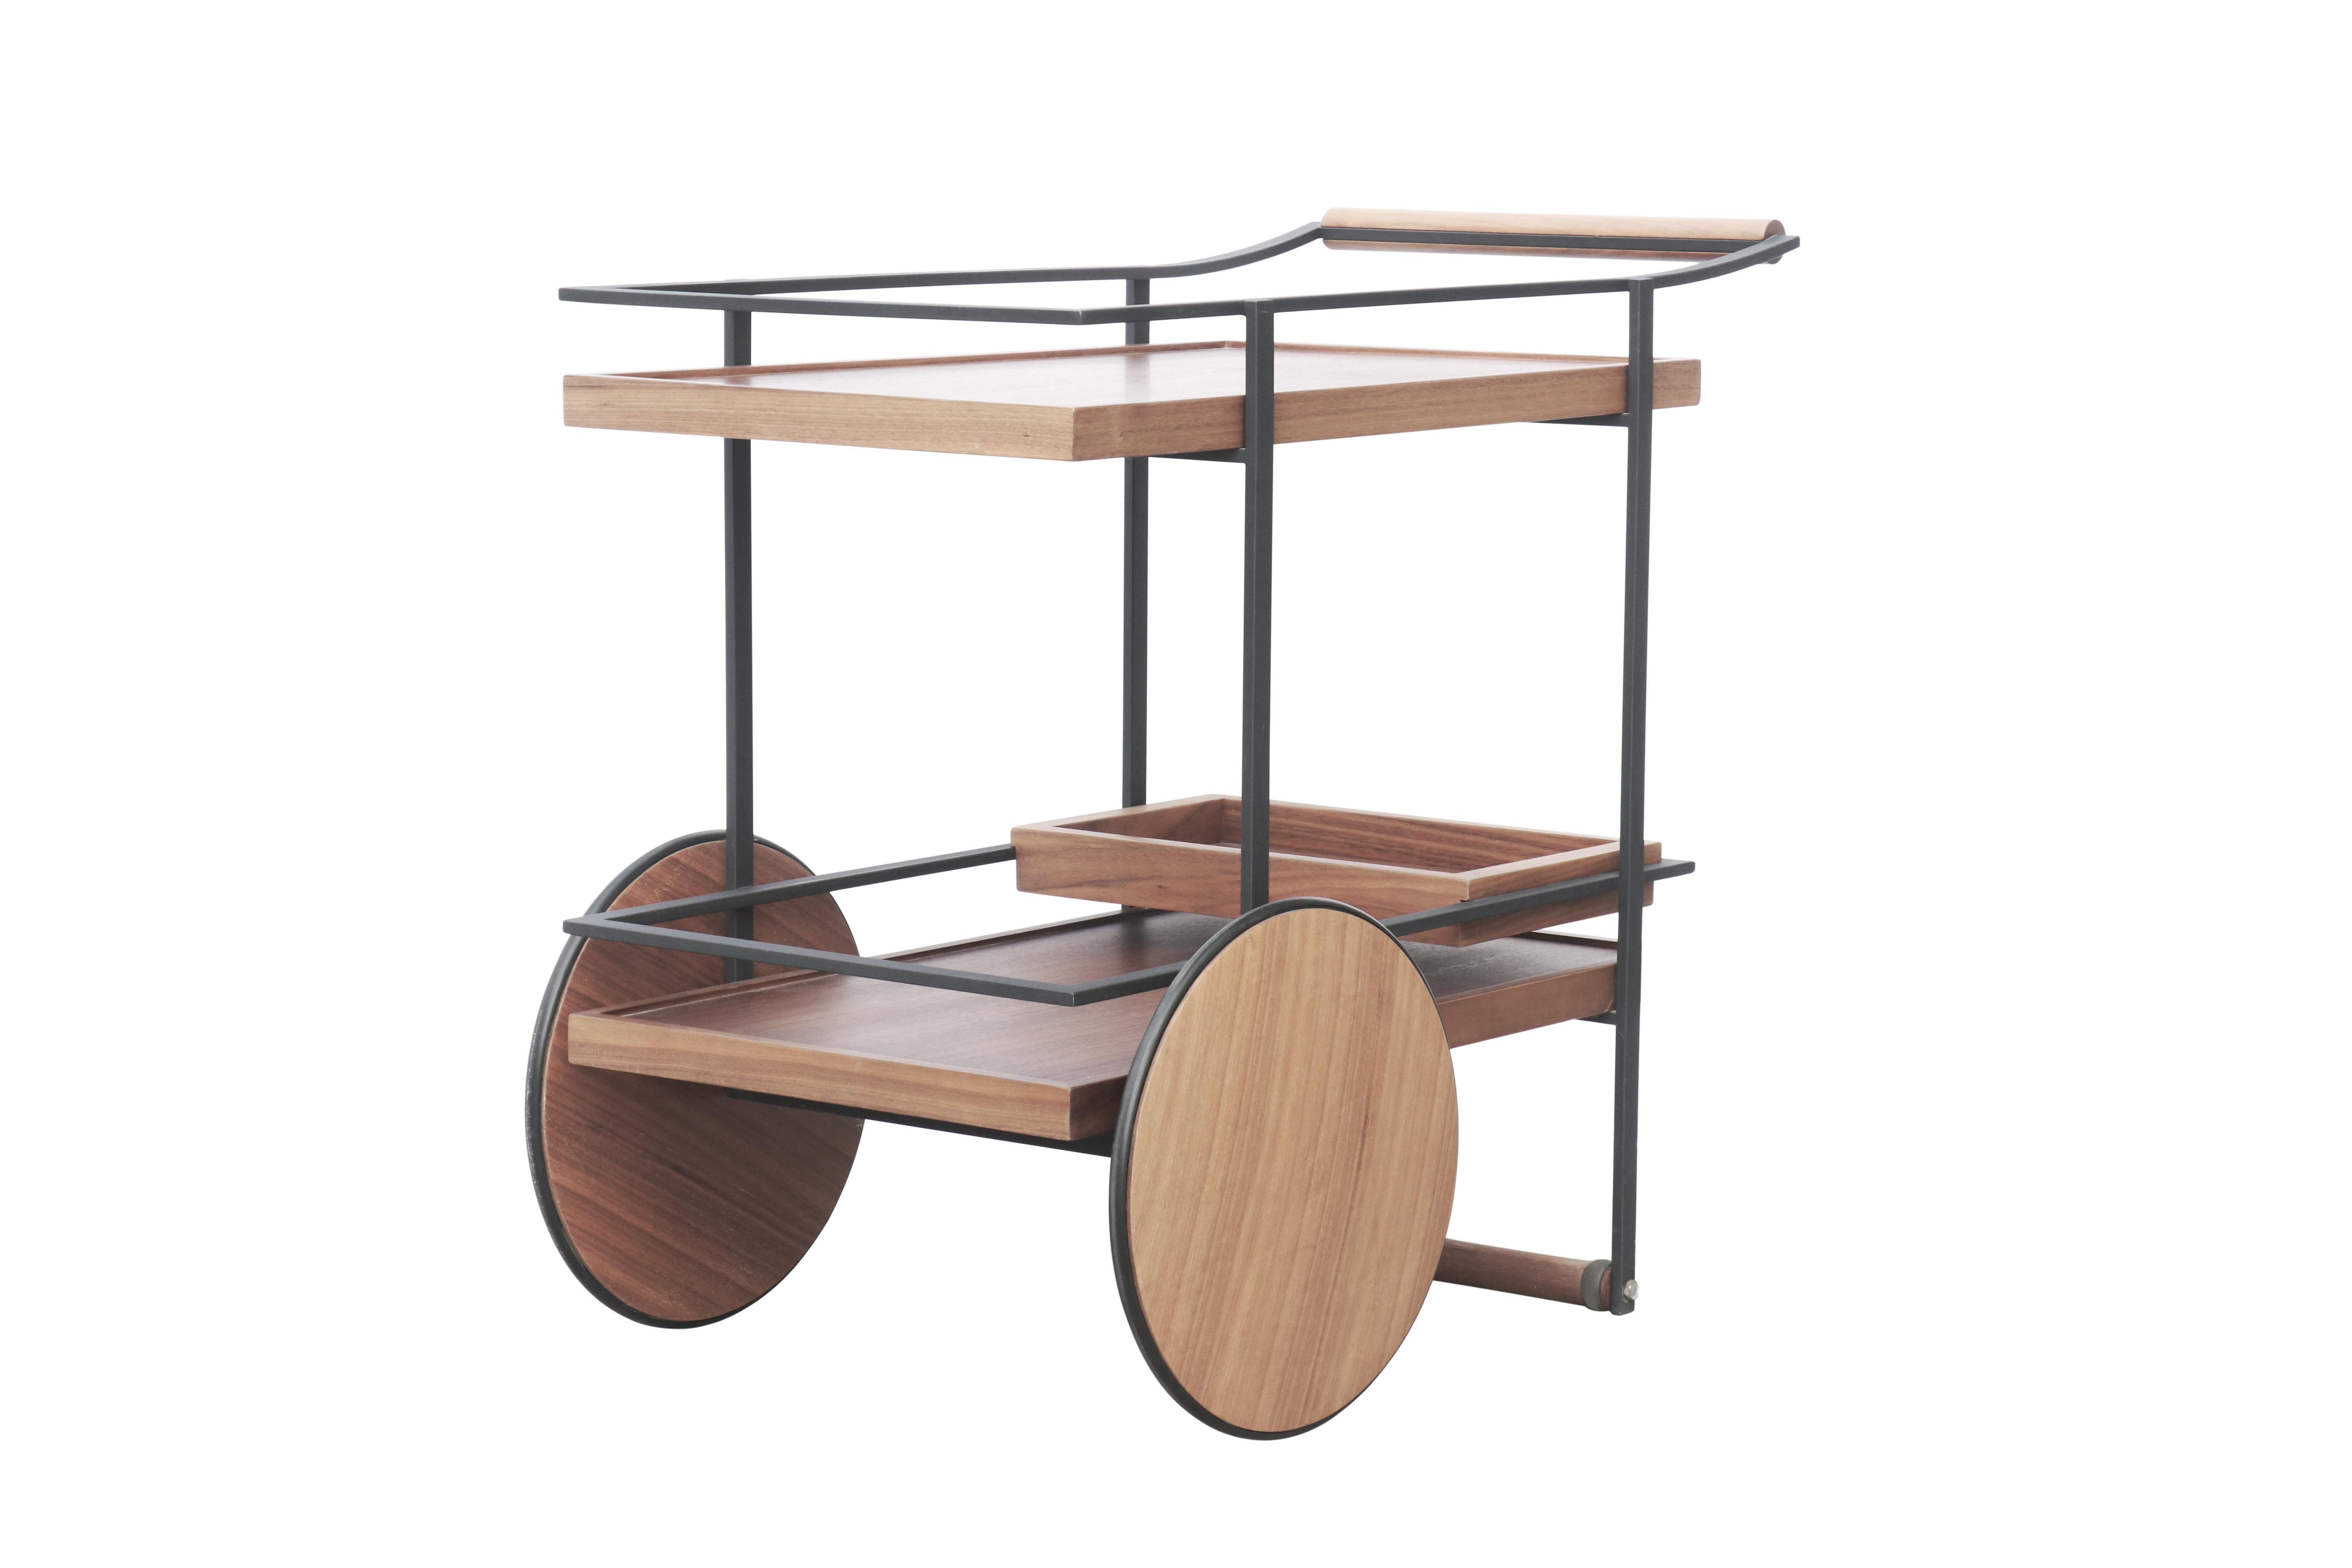 Designed to turn negative space into an aesthetic feature, the James Bar Cart by Stellar Works is an understated study in handsome, functional furniture. Created by collaborative studio Yabu Pushelberg, this bar cart was subtly inspired by the world